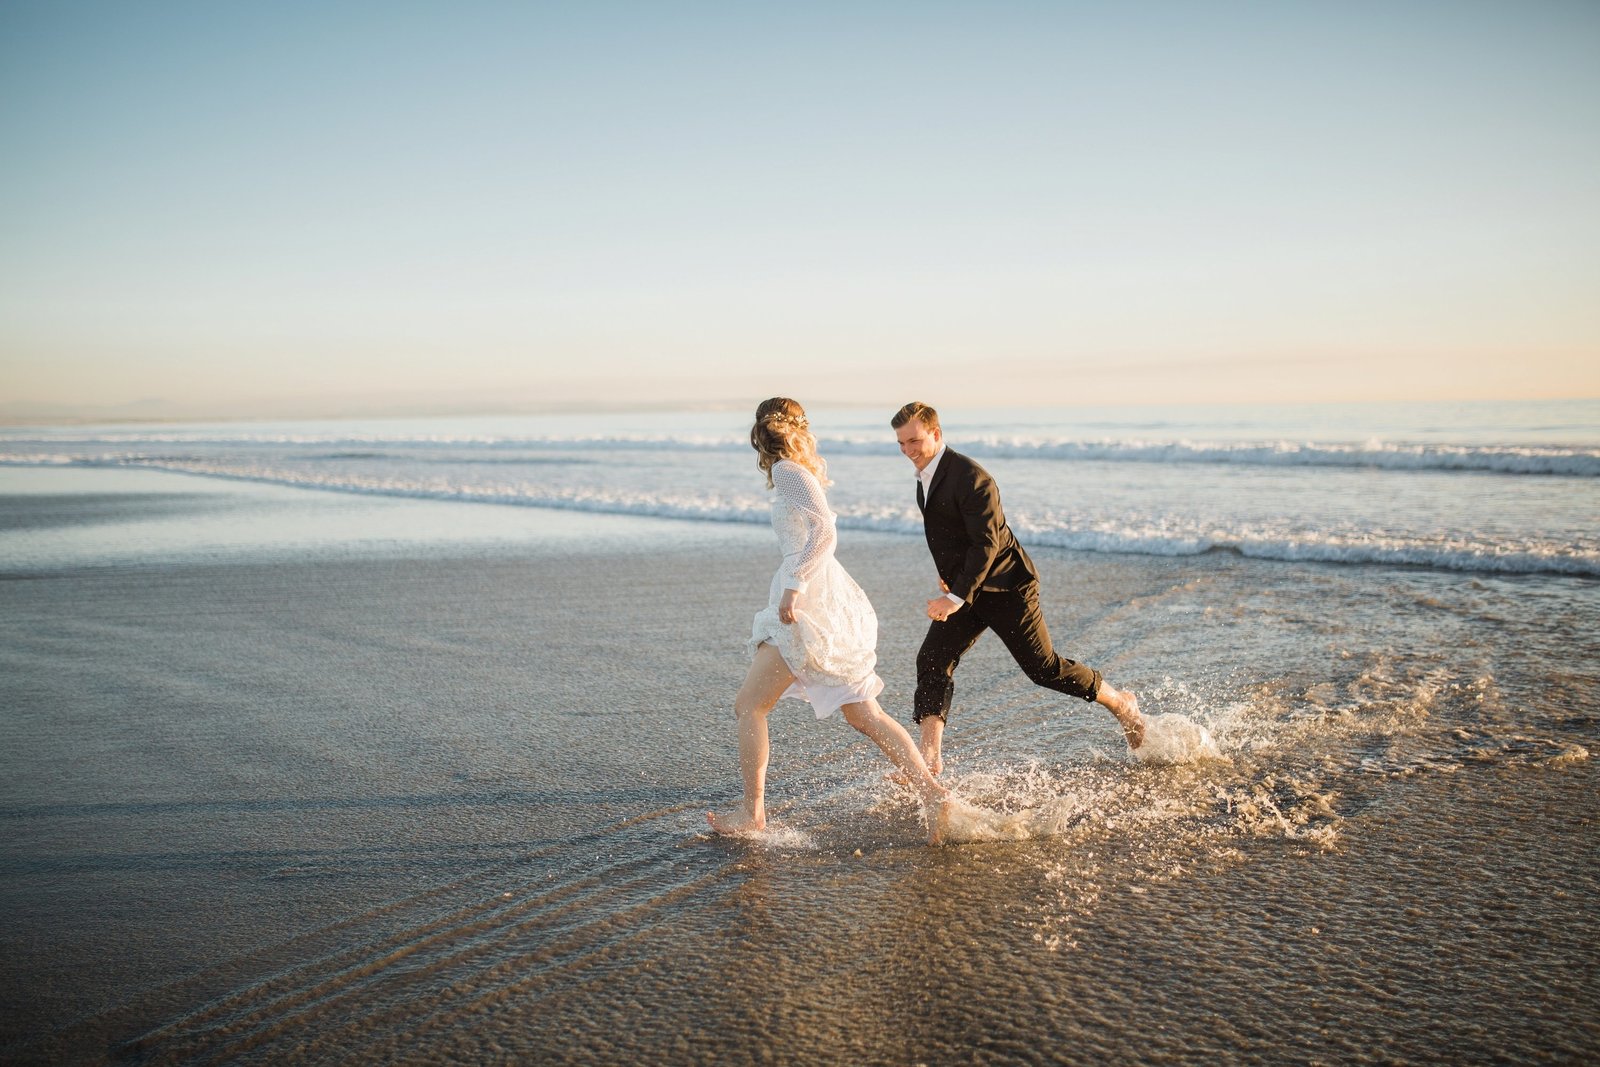 Destination adventure elopement photos at the beach in San Diego by elopement photographer My Sun and Stars Co